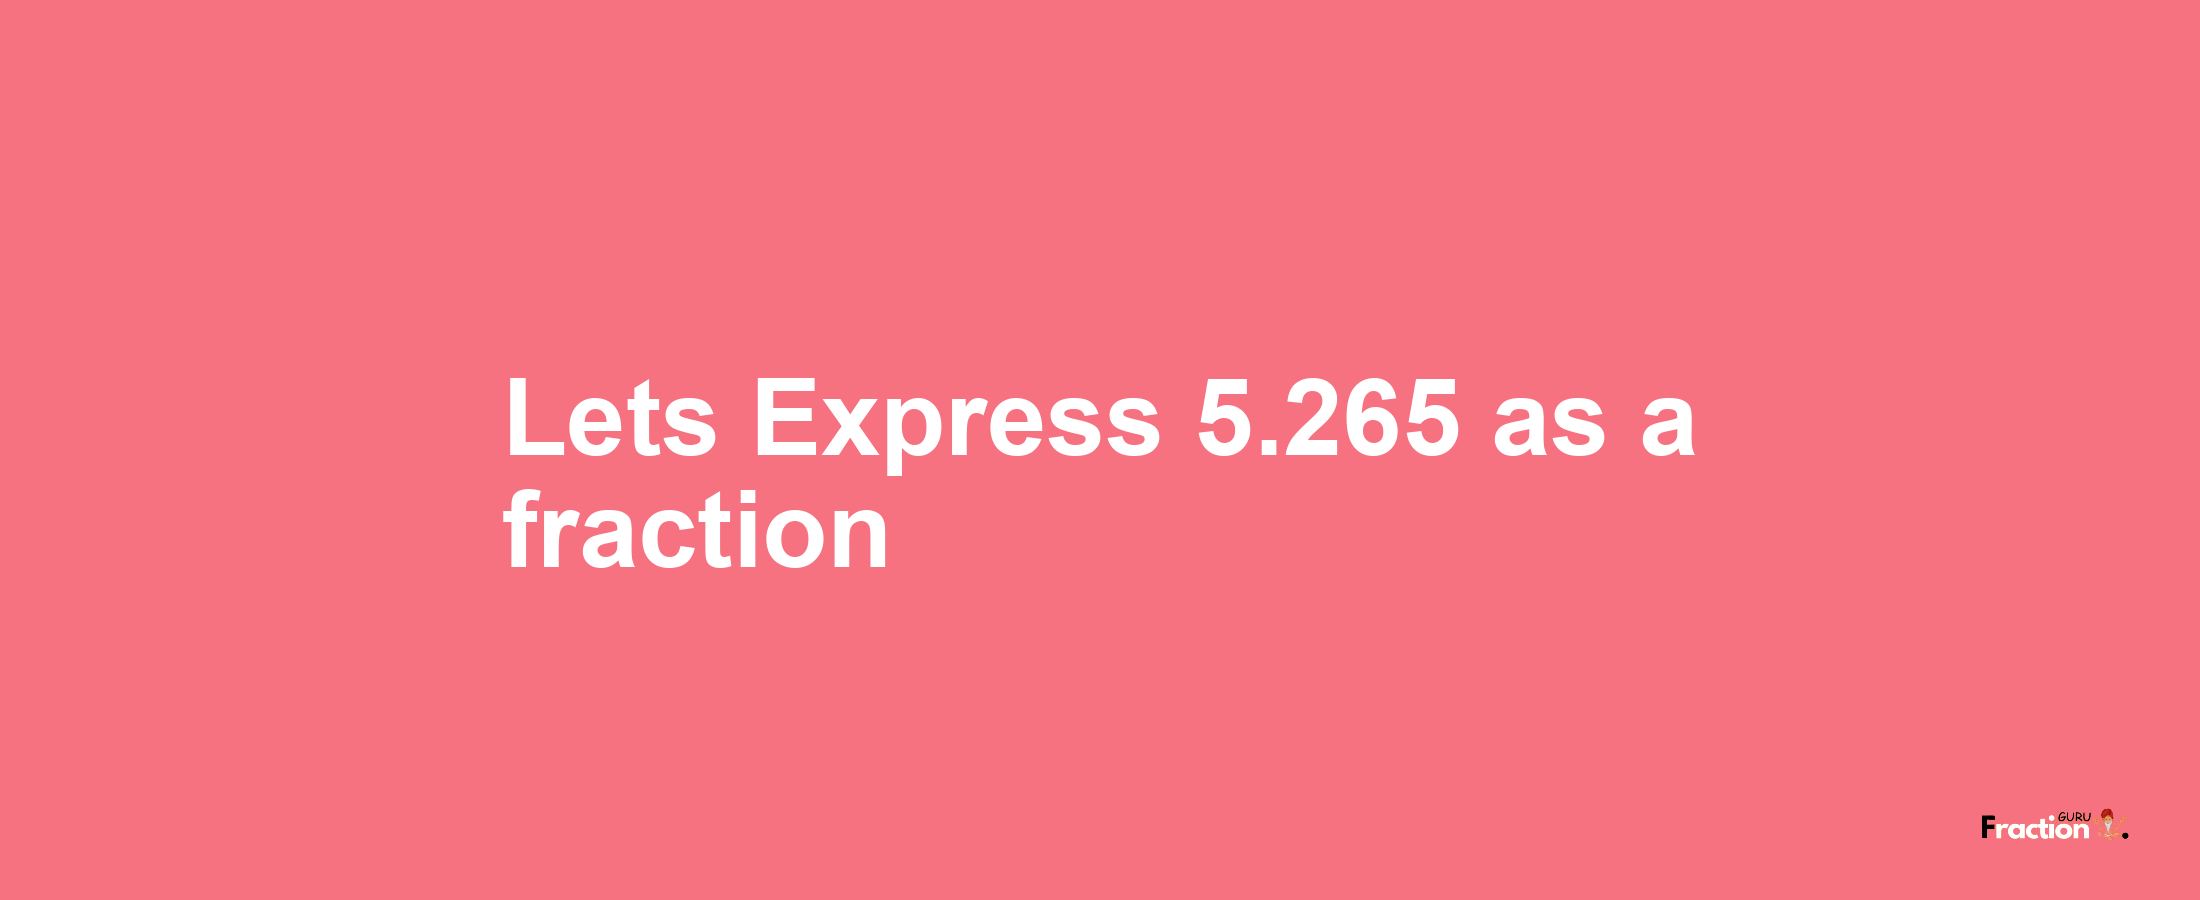 Lets Express 5.265 as afraction